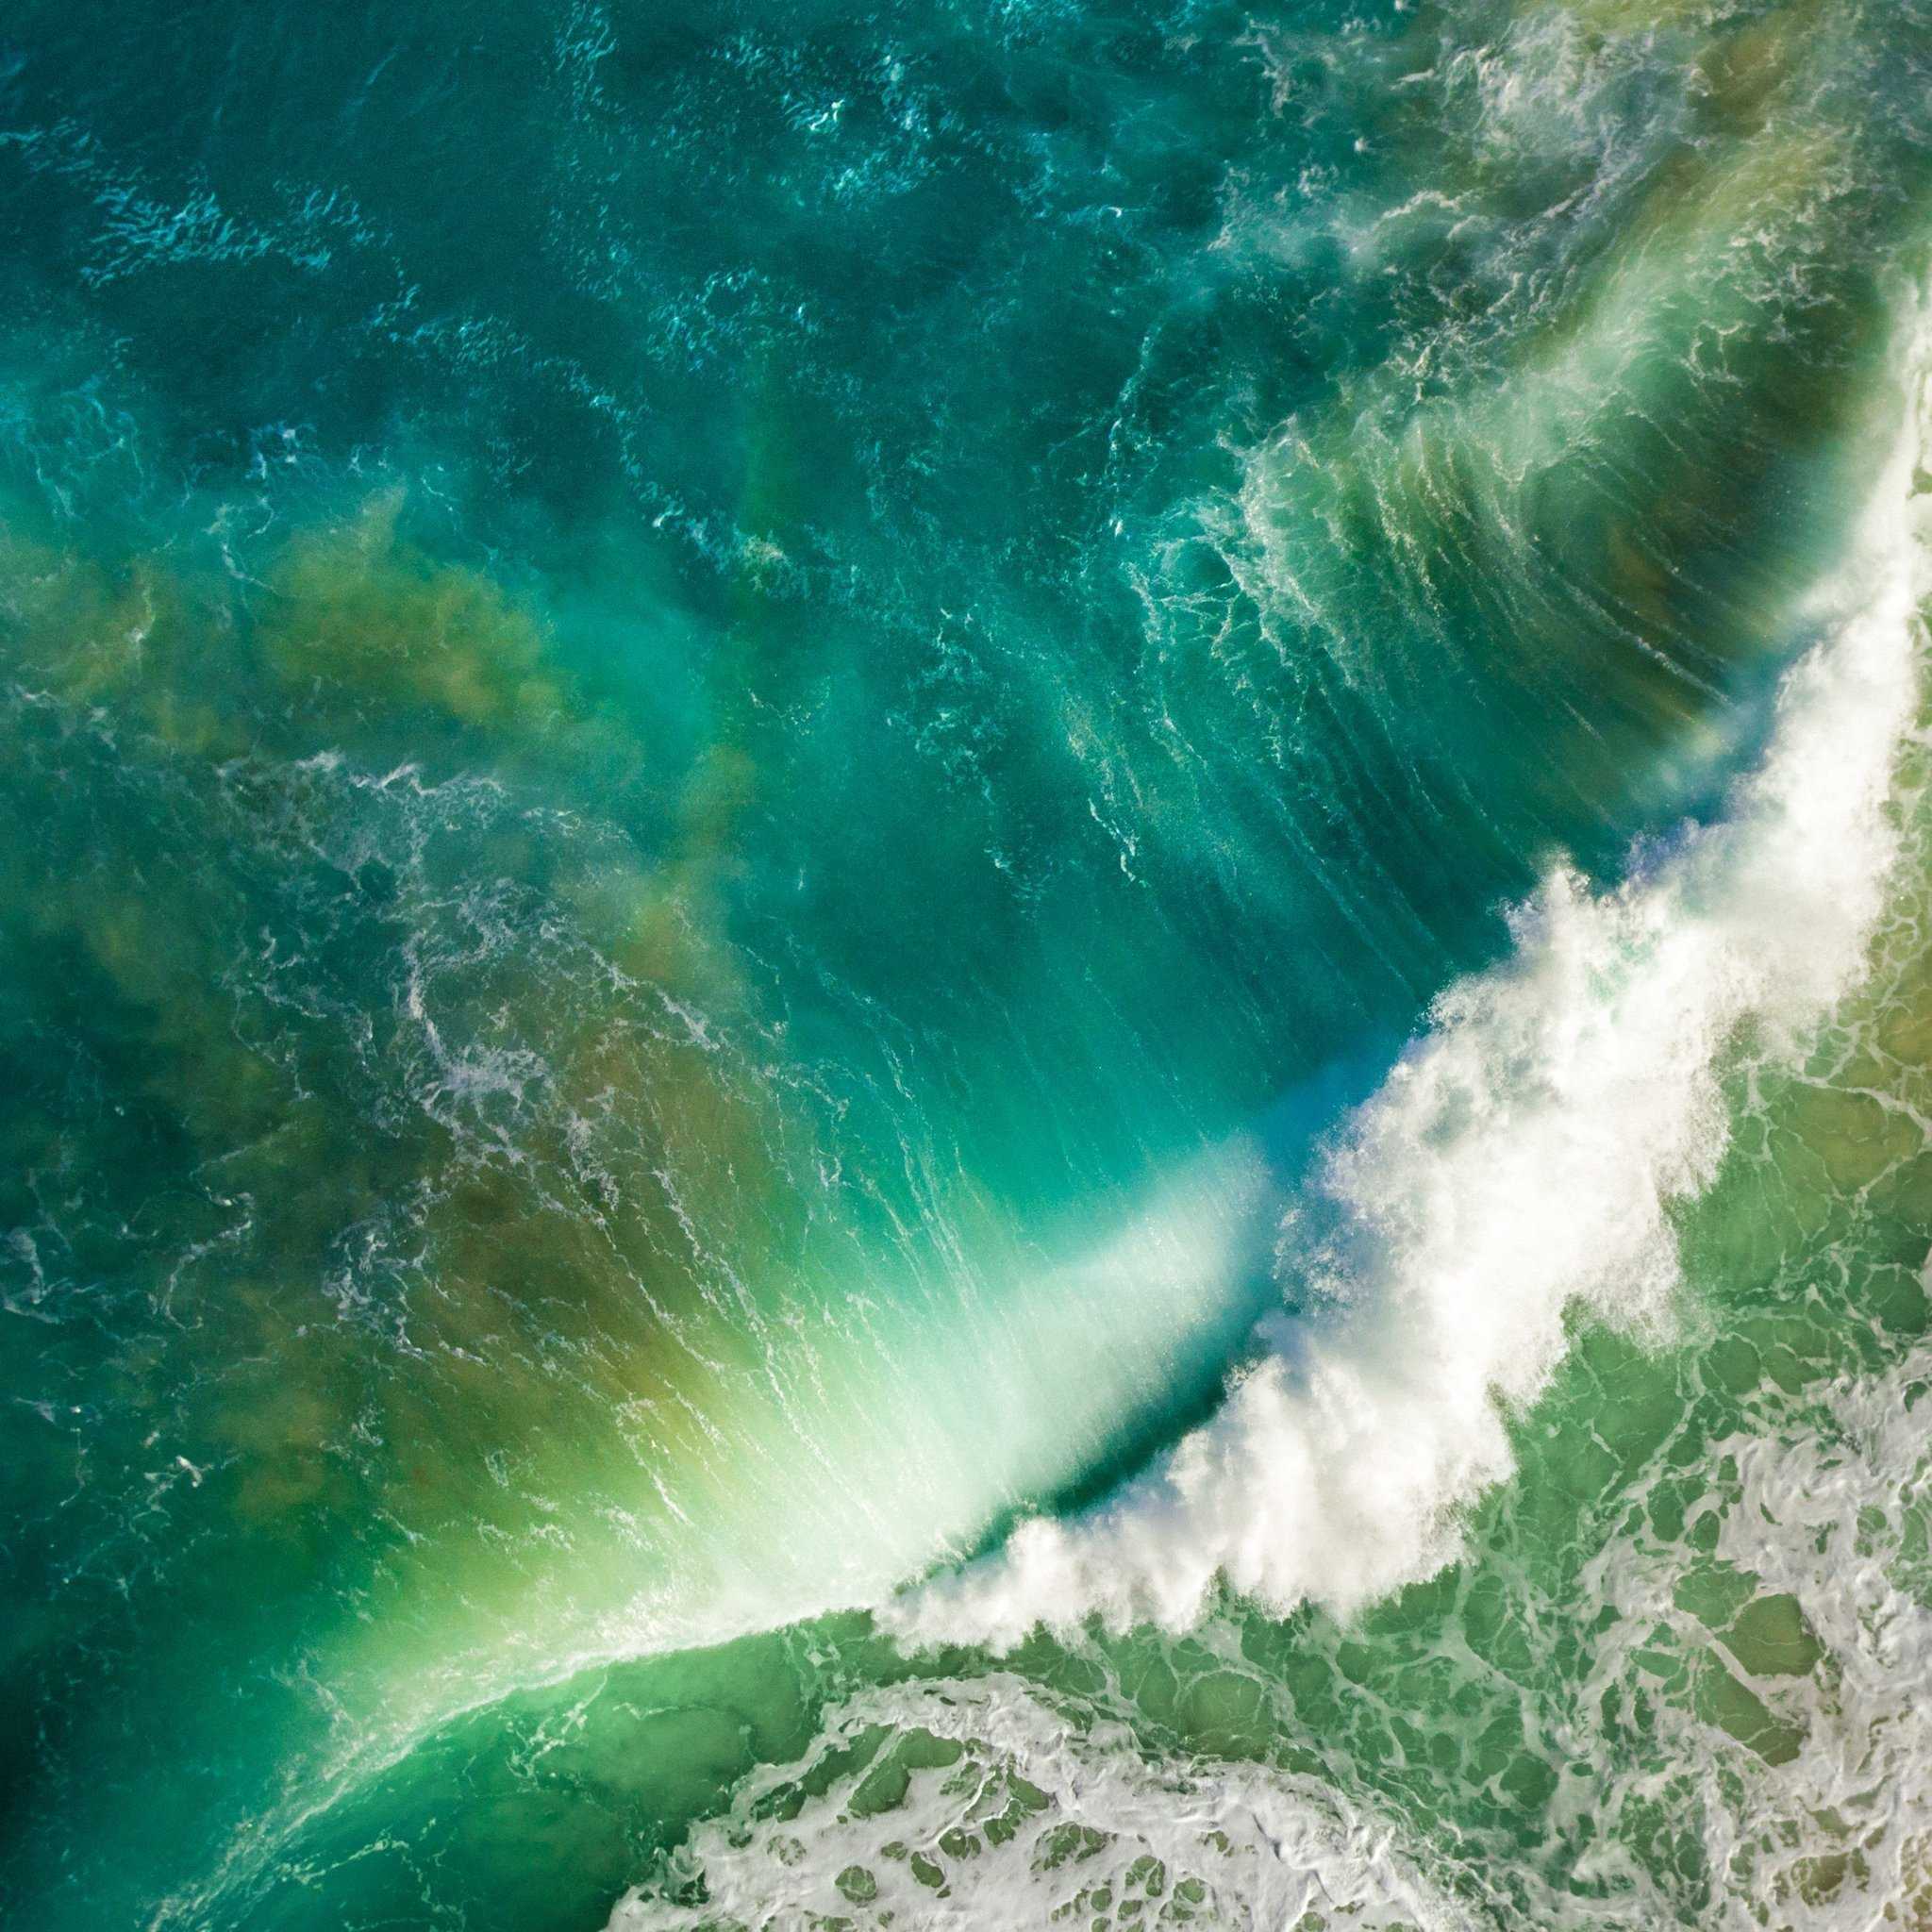 Download Apple's fancy wallpaper from iOS 10 and macOS